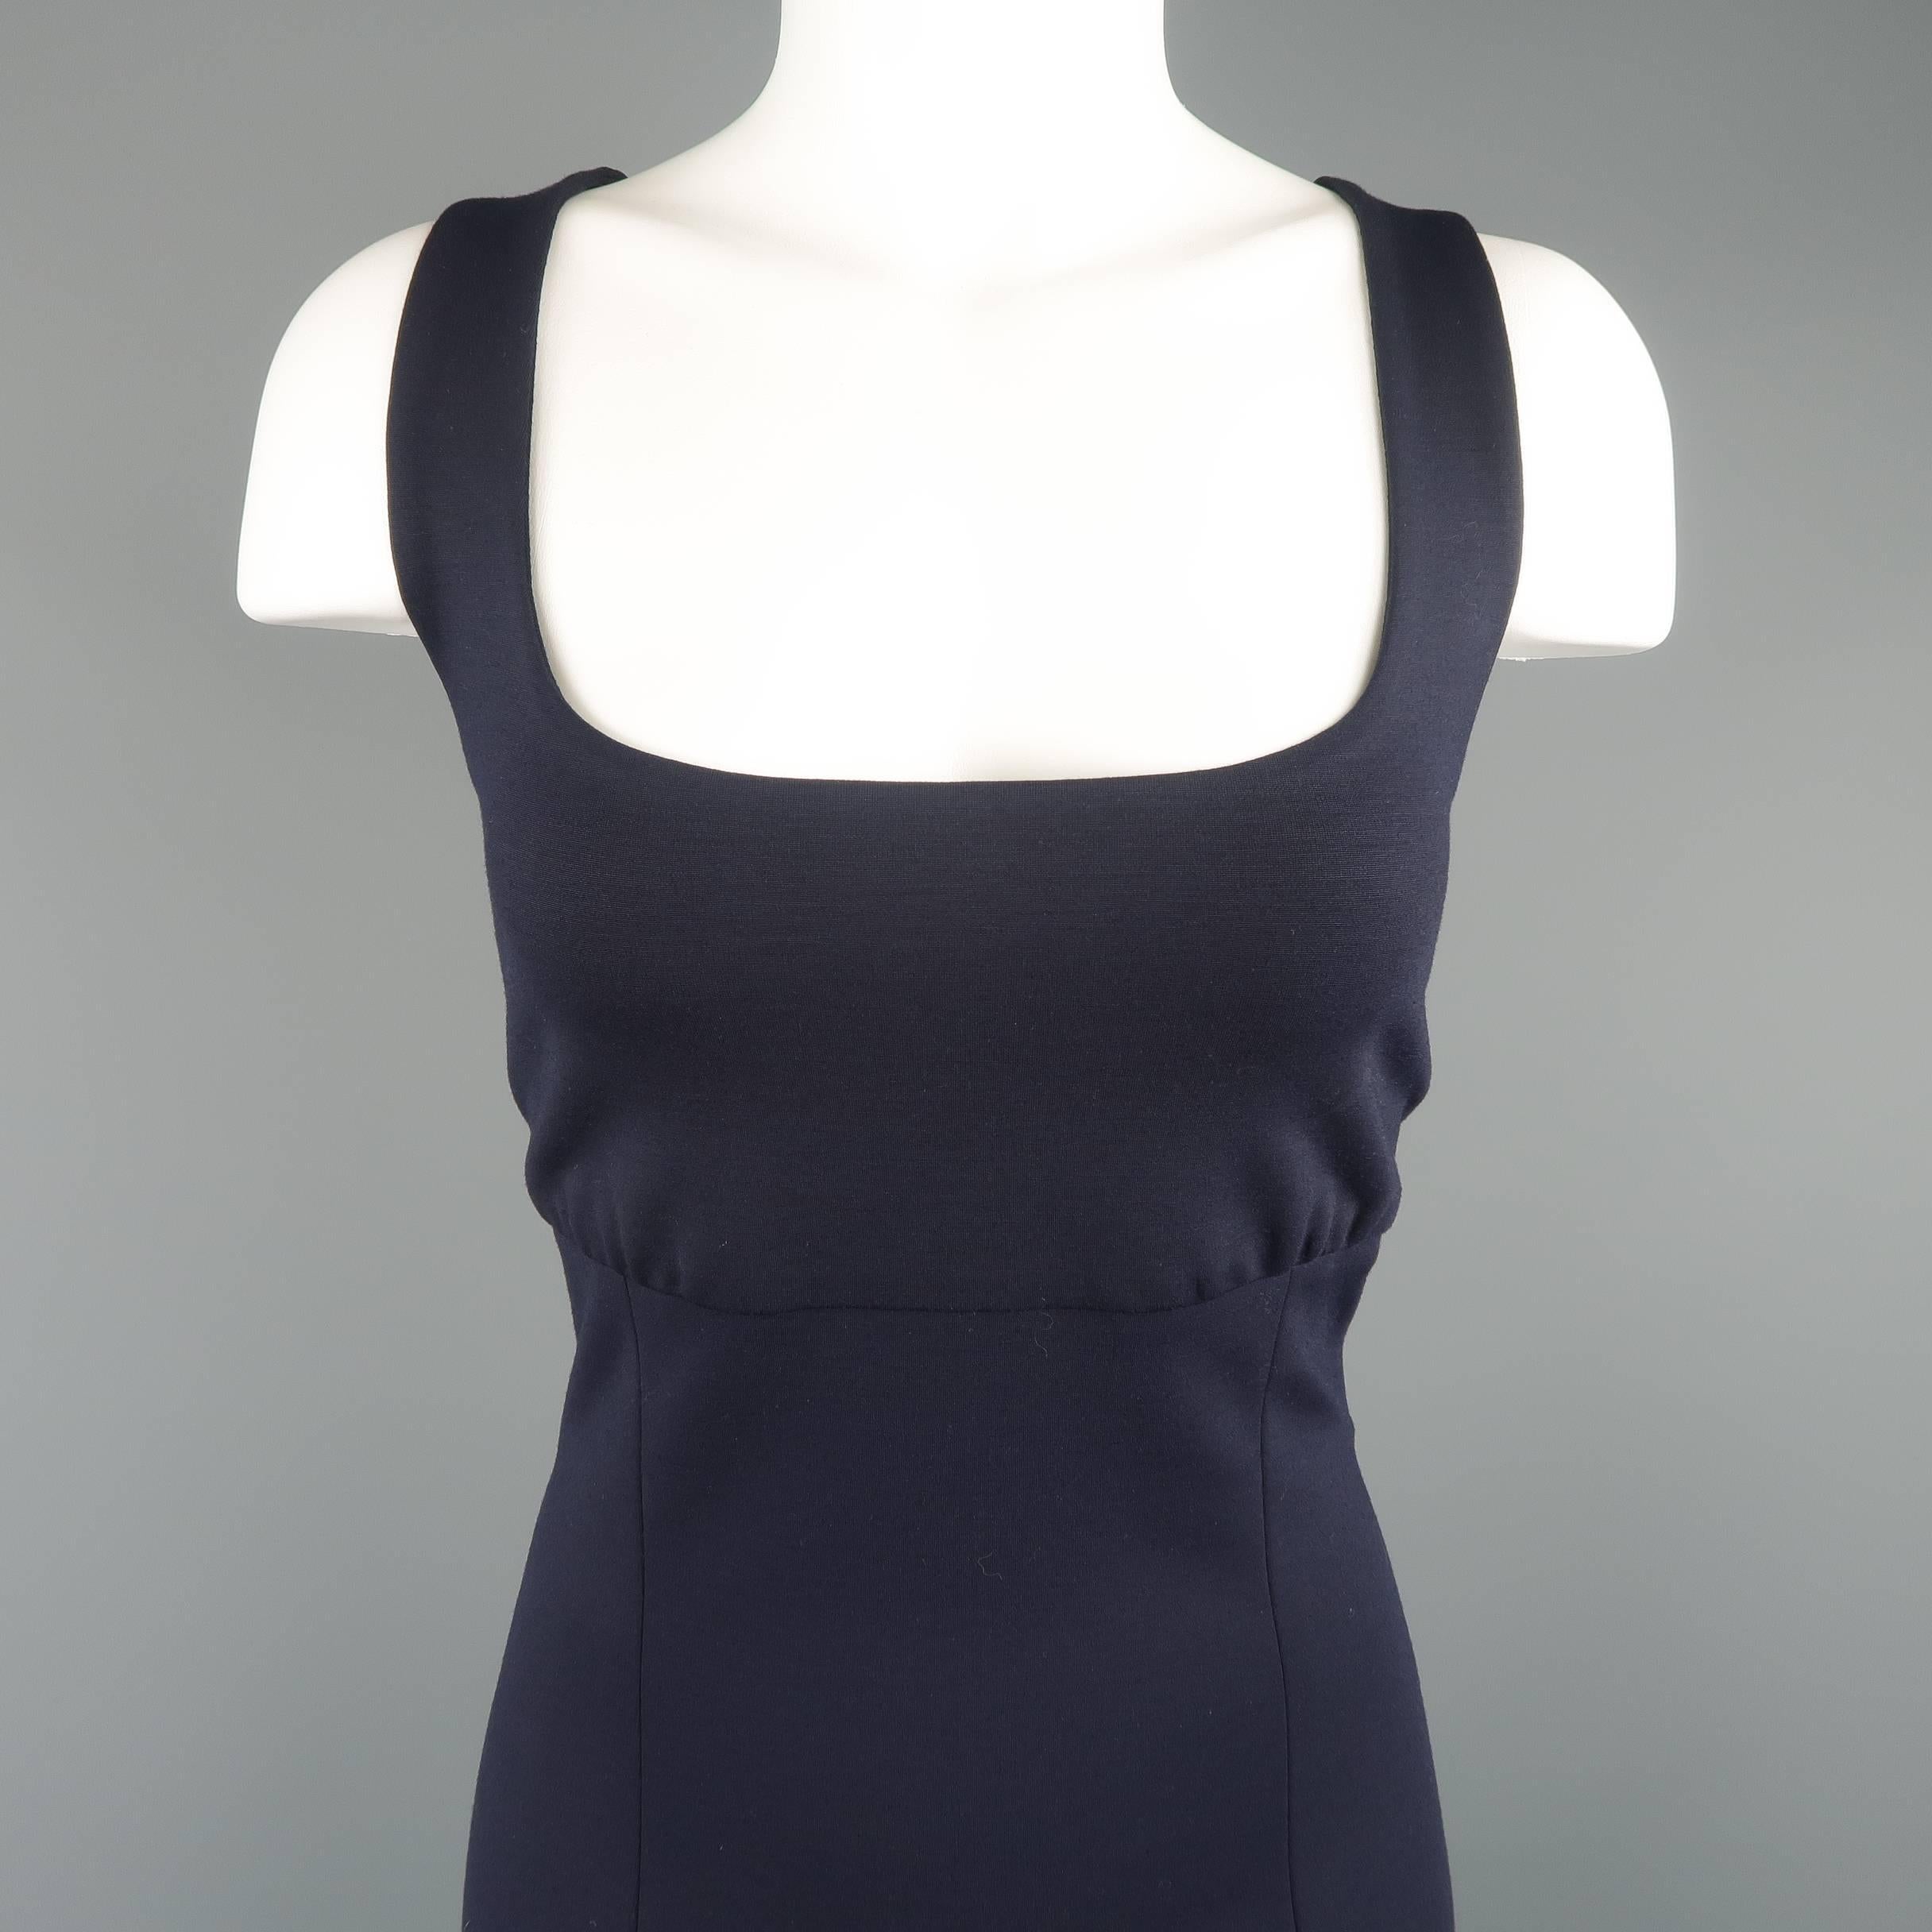 RALPH LAUREN BLACK LABEL sheath dress comes in navy blue wool blend jersey knit wit a scoop neck, thick straps gathered underbust seam and slim fit skirt. Mad ein USA.
 
Excellent Pre-Owned Condition.
Marked: 10
 
Measurements:
 
Shoulder: 15